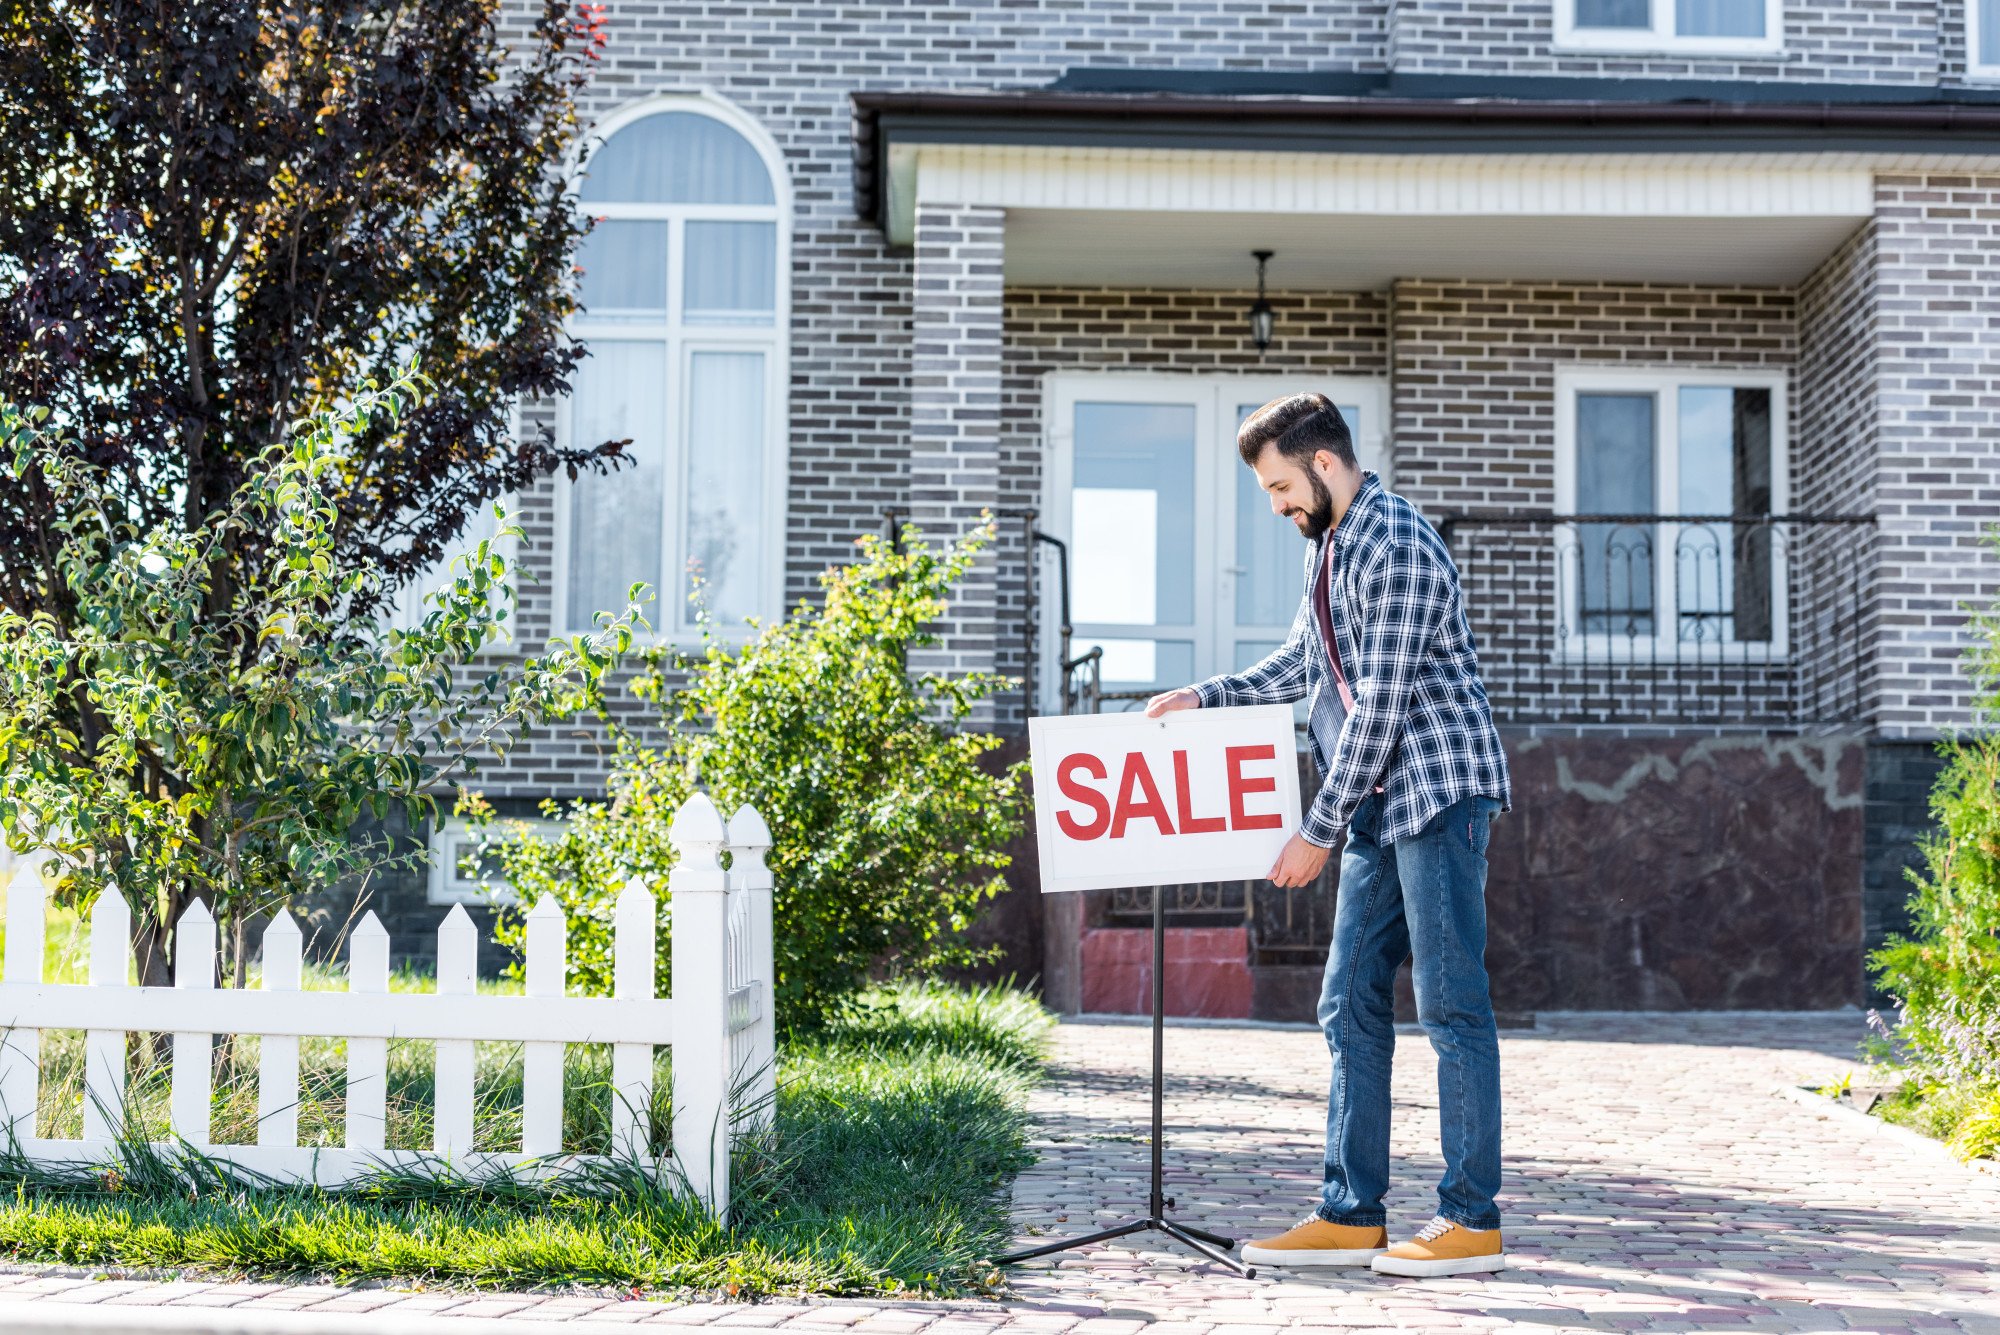 Cash Sales: What to Know About Selling a House for Cash